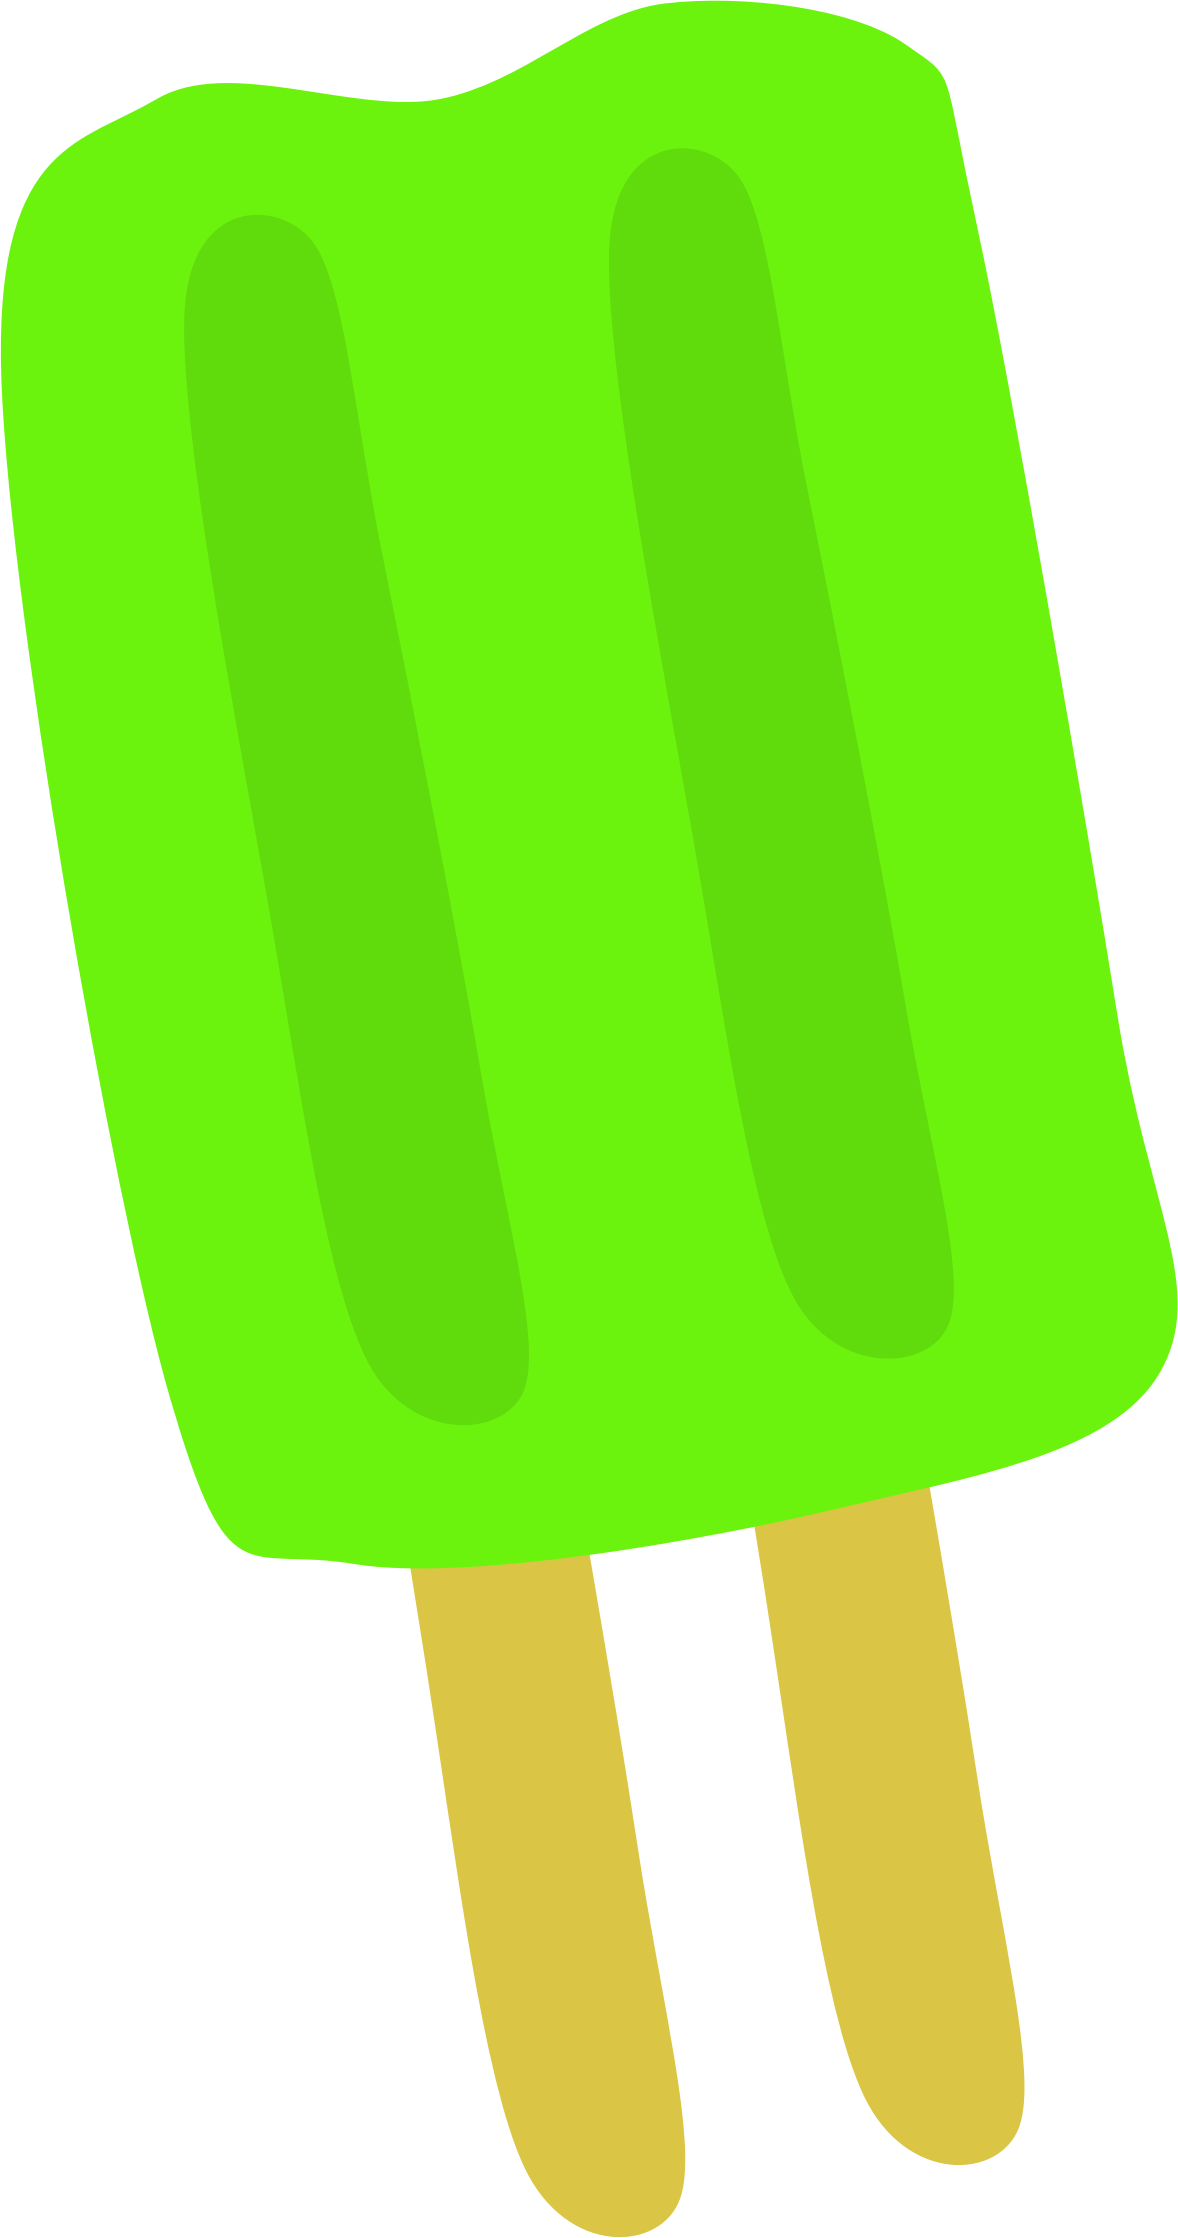 Popsicle image popsicles pinterest. Donuts clipart green